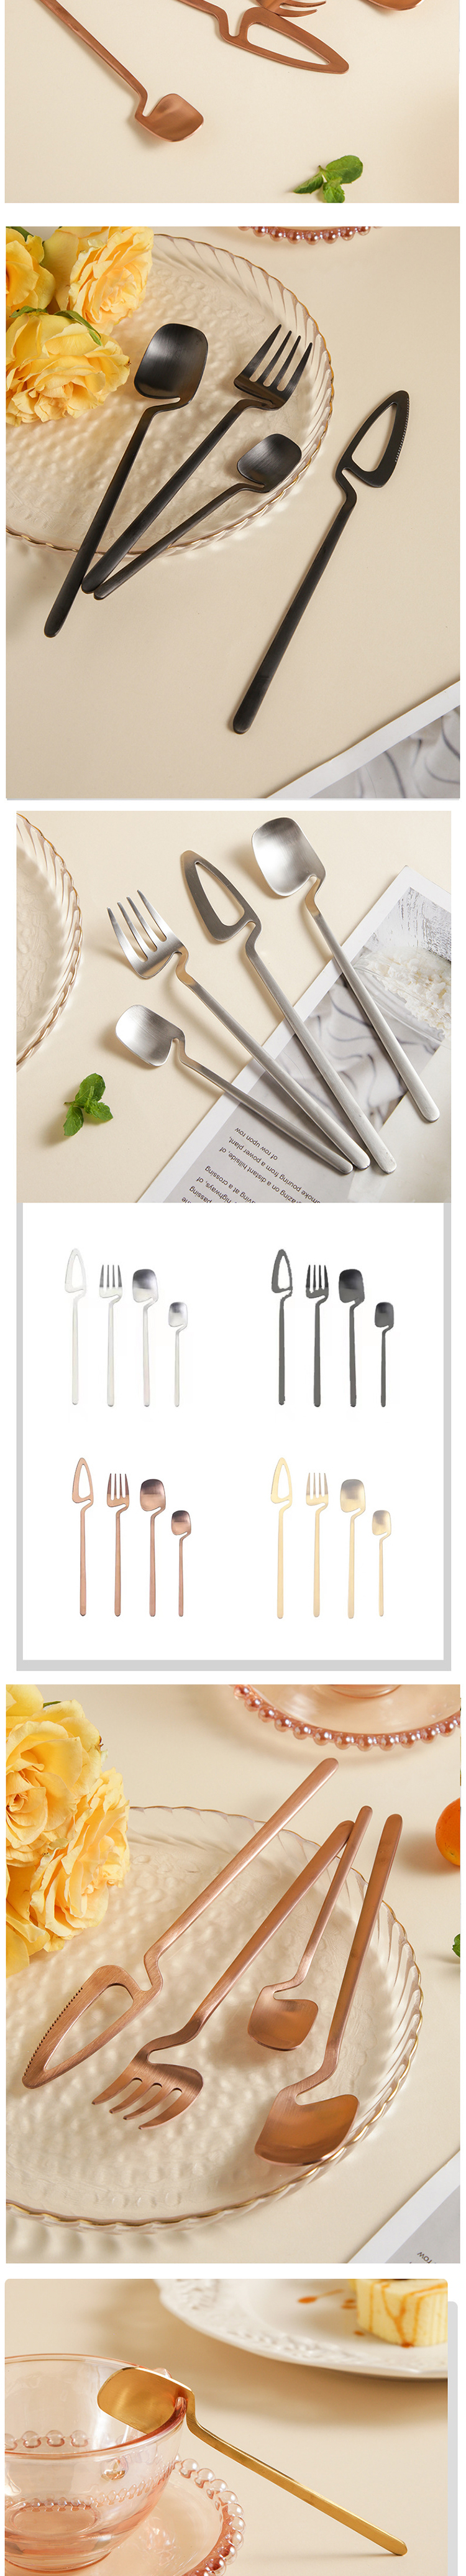 fork and spoon travel set